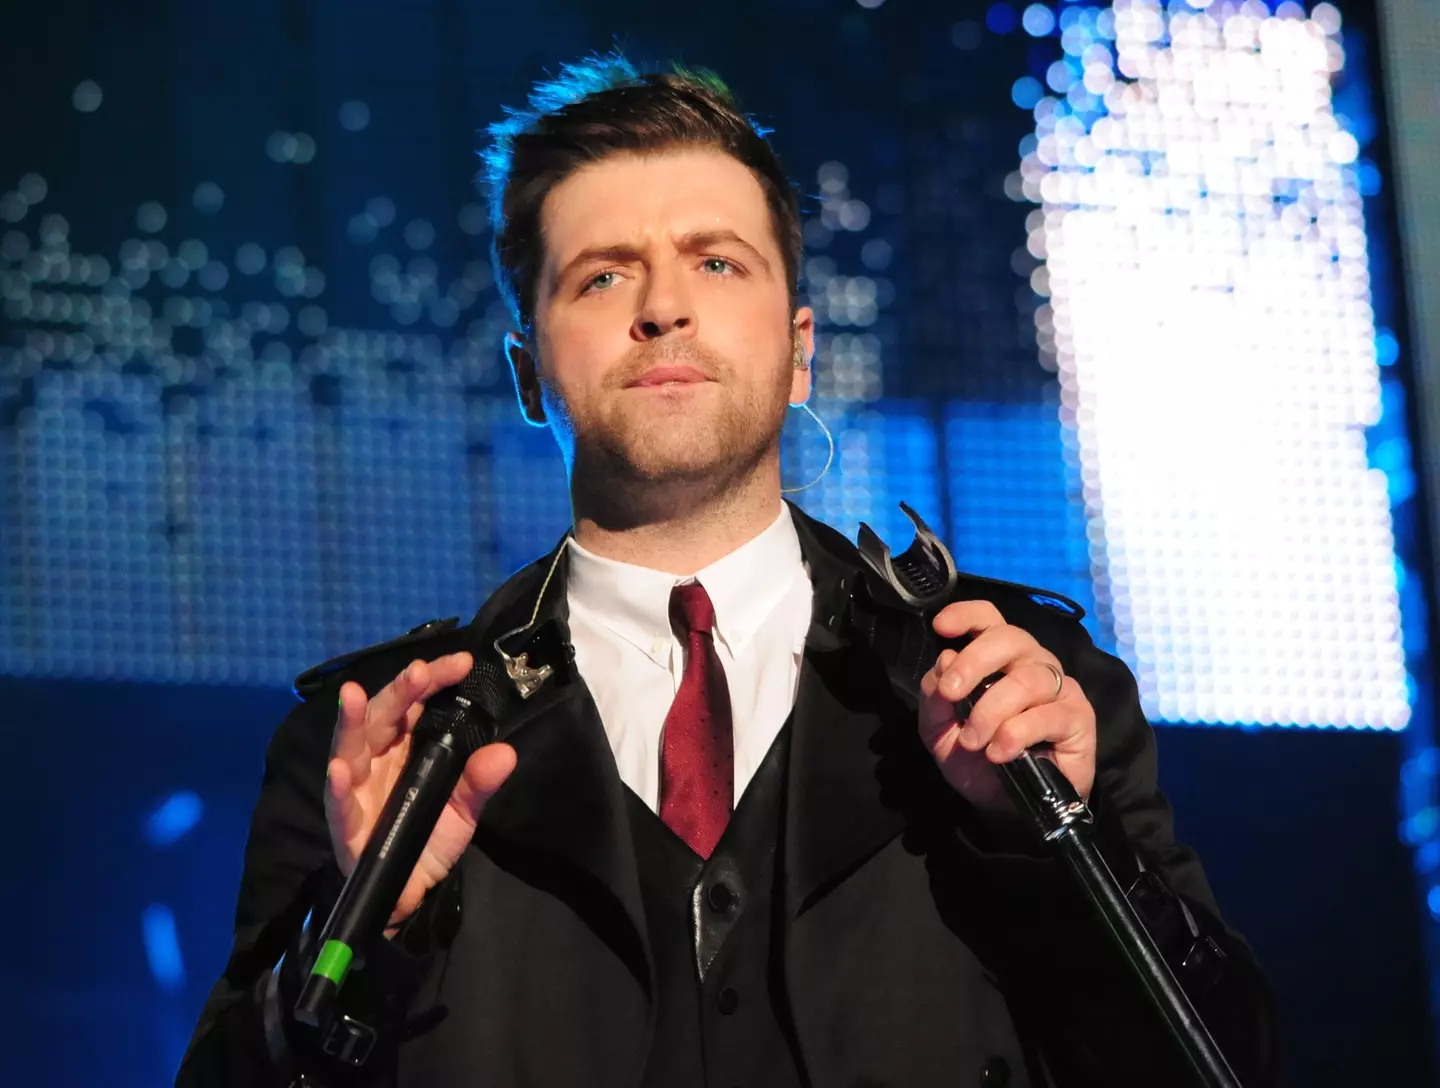 Westlife star Mark Feehily, 42, has revealed he has pneumonia and will be pulling out of more tour dates.